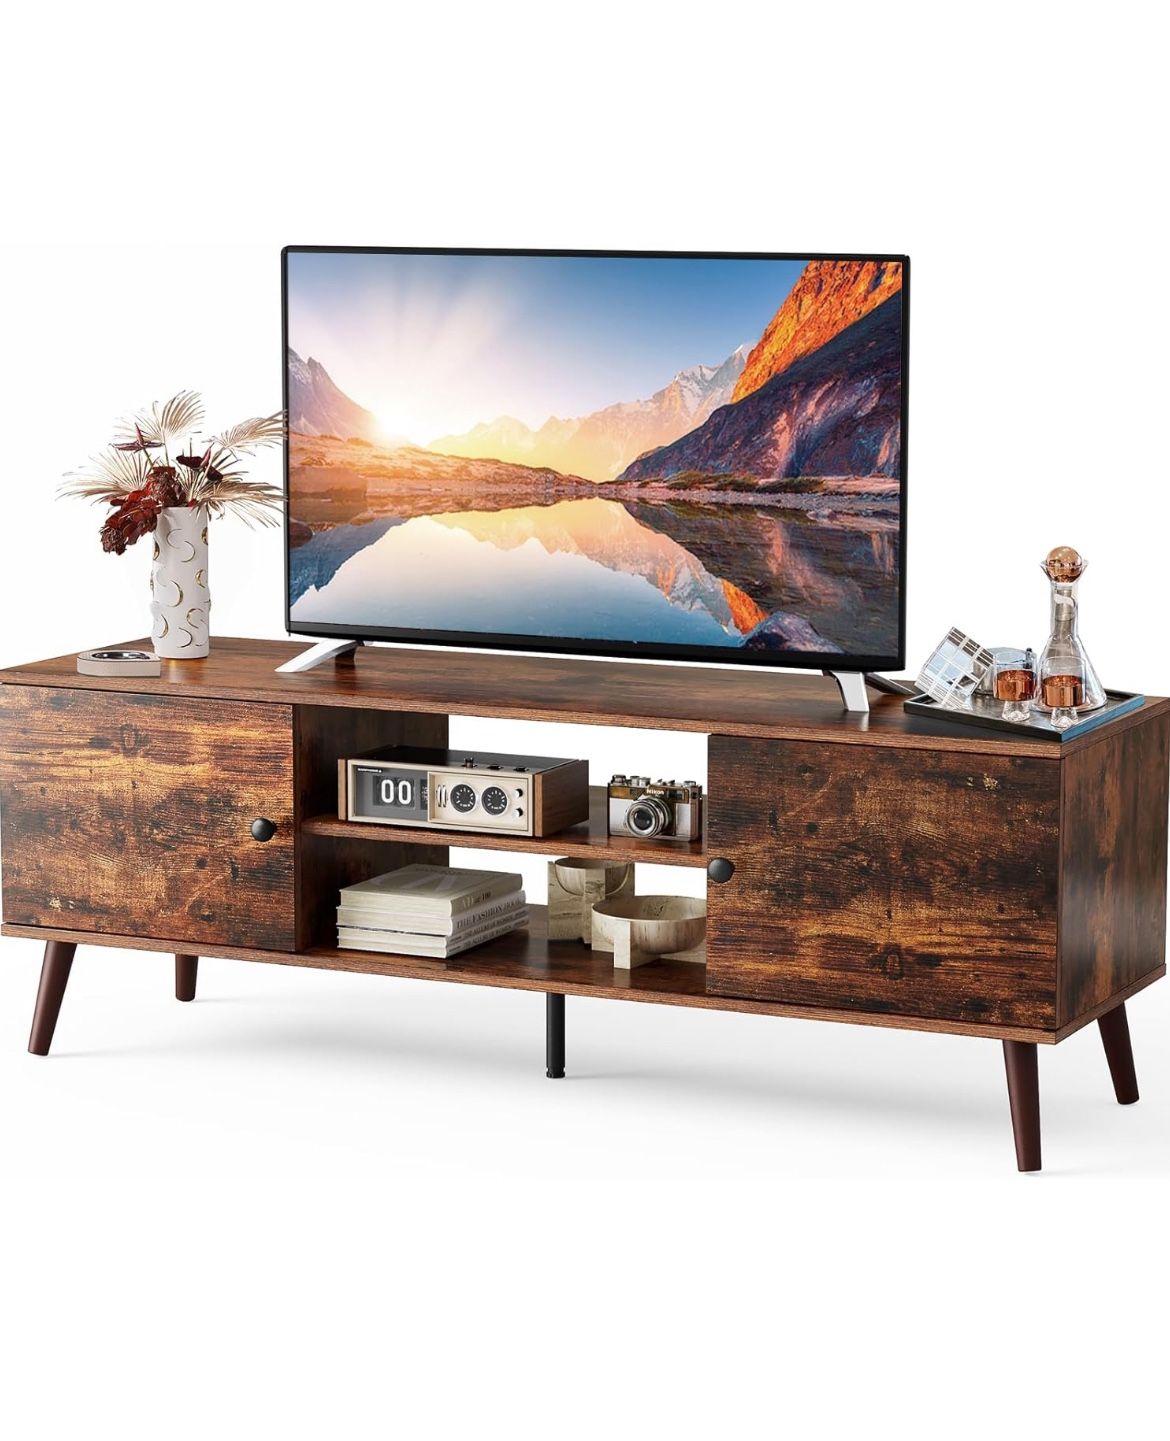 60” TV STAND